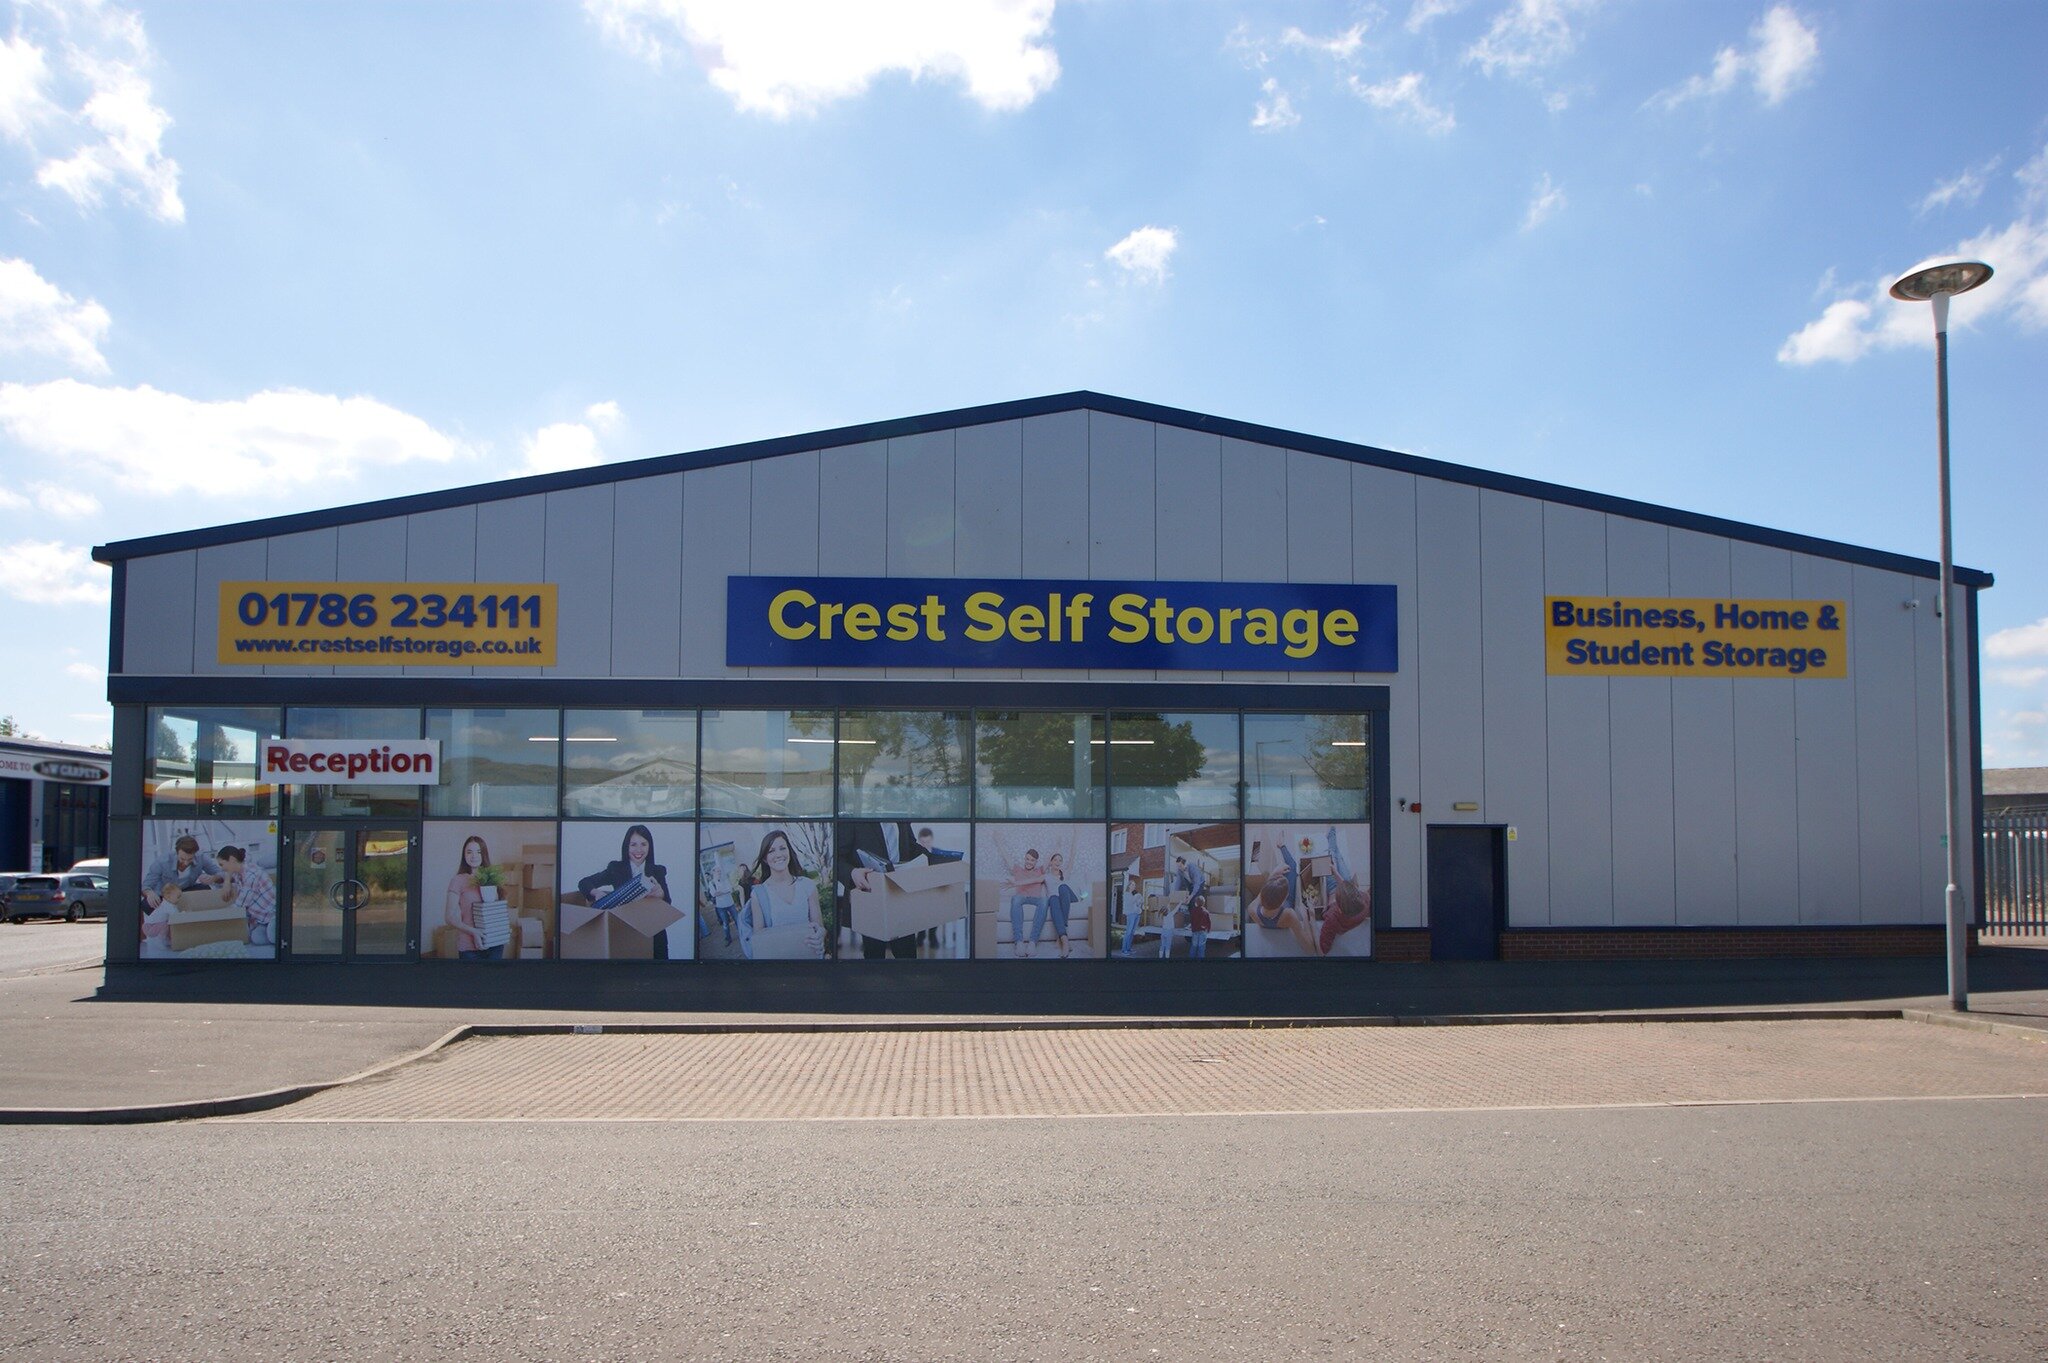 📦 Need flexible storage solutions in Stirling? Look no further than Crest Self Storage! Our easily accessible centre offers a range of unit sizes, from 9 sq ft to 175 sq ft, perfect for both personal and business needs. 

Whether you're decluttering